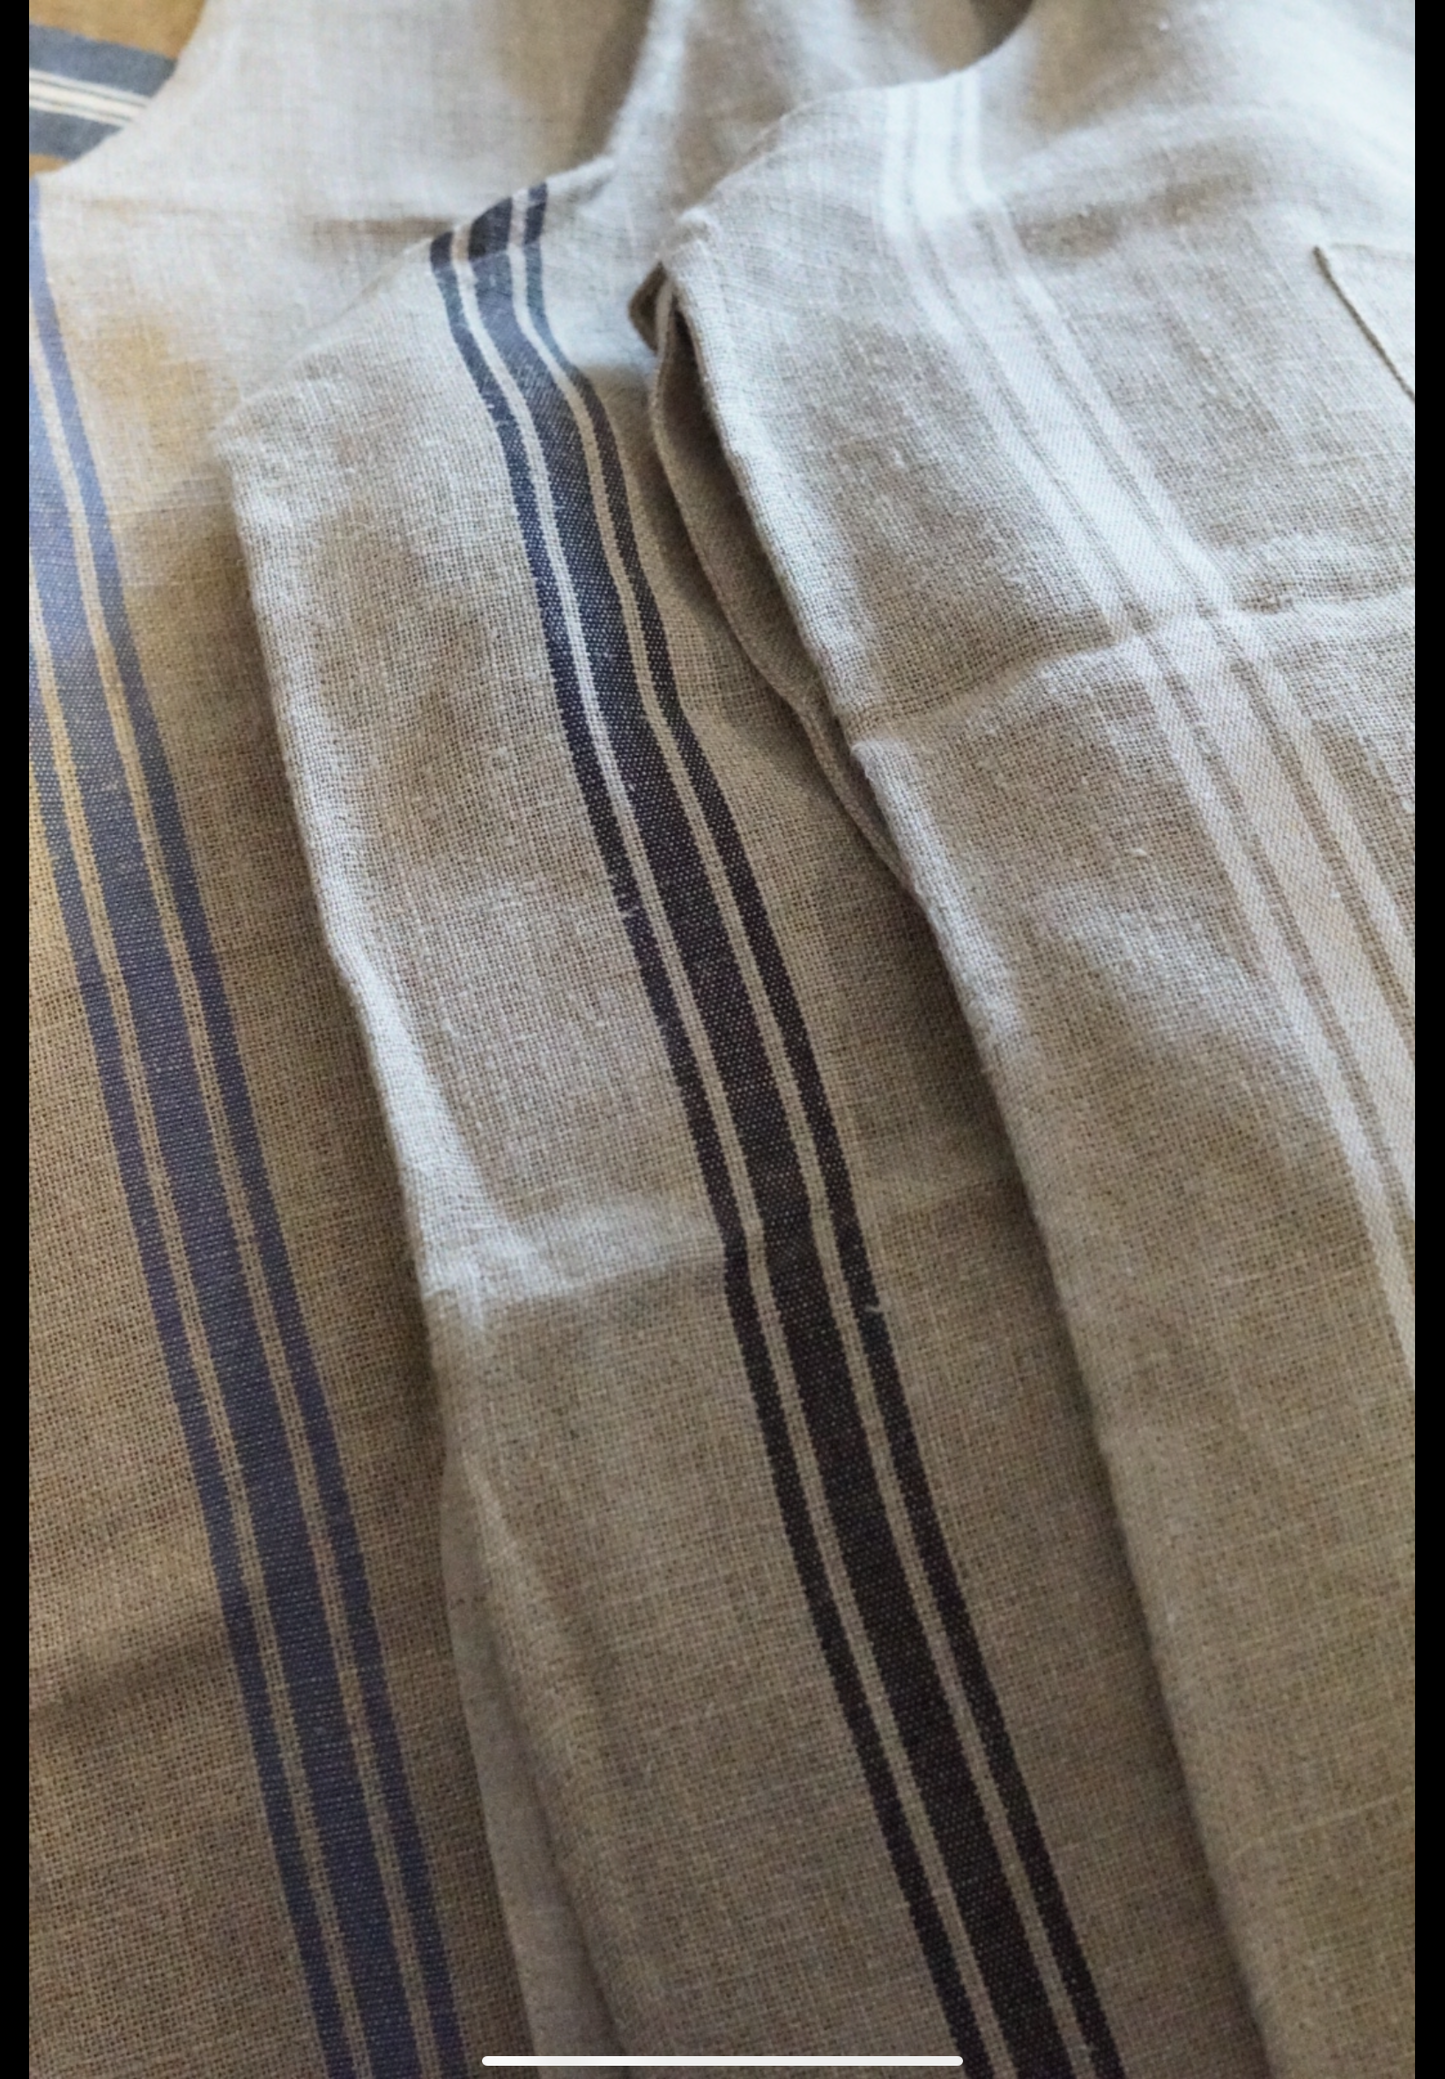 Full French Striped Linen Apron